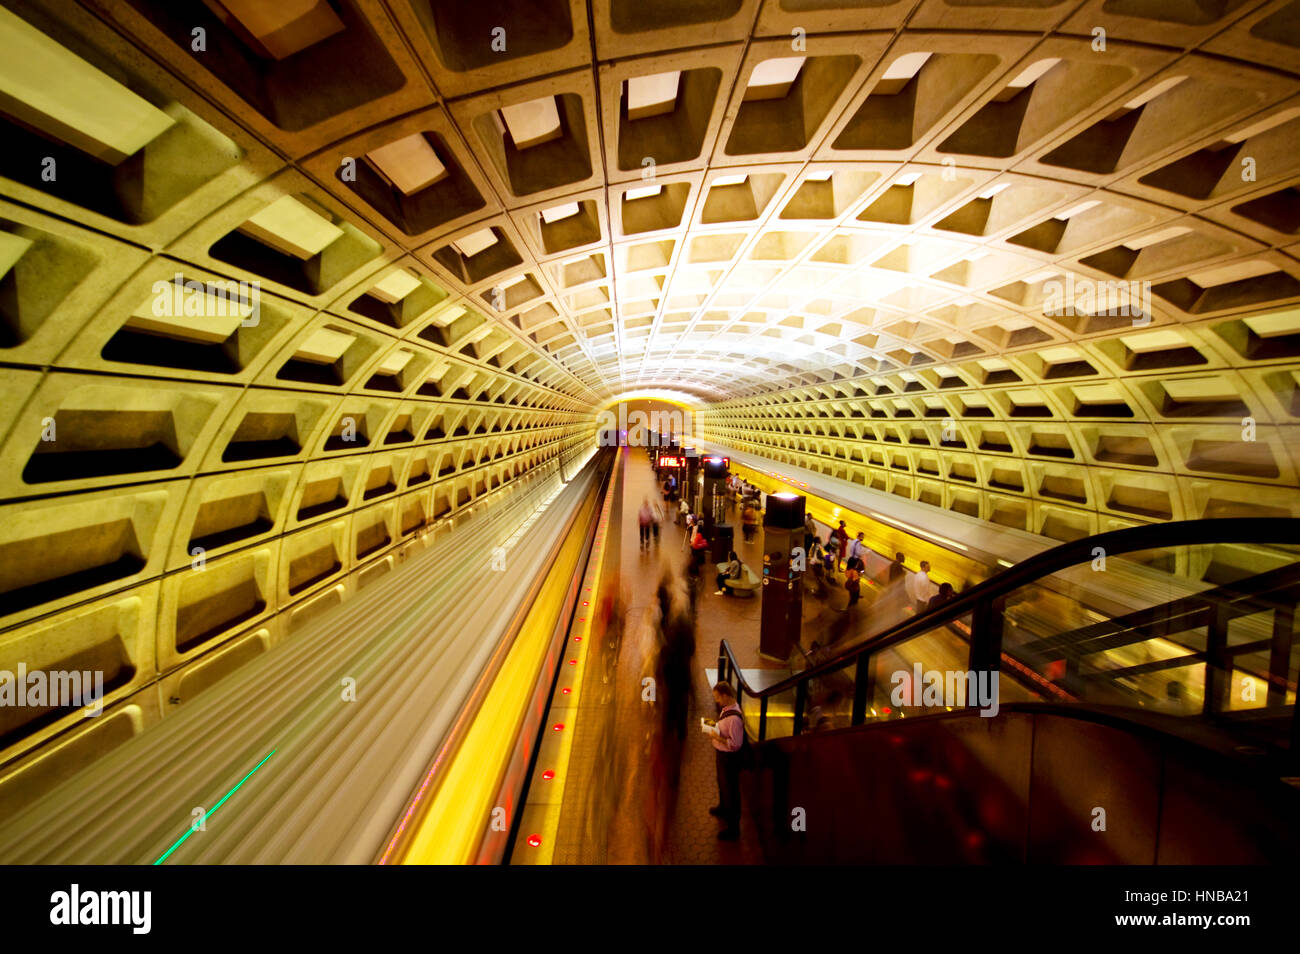 A train in motion leaving the station on the Washington DC metro Stock Photo